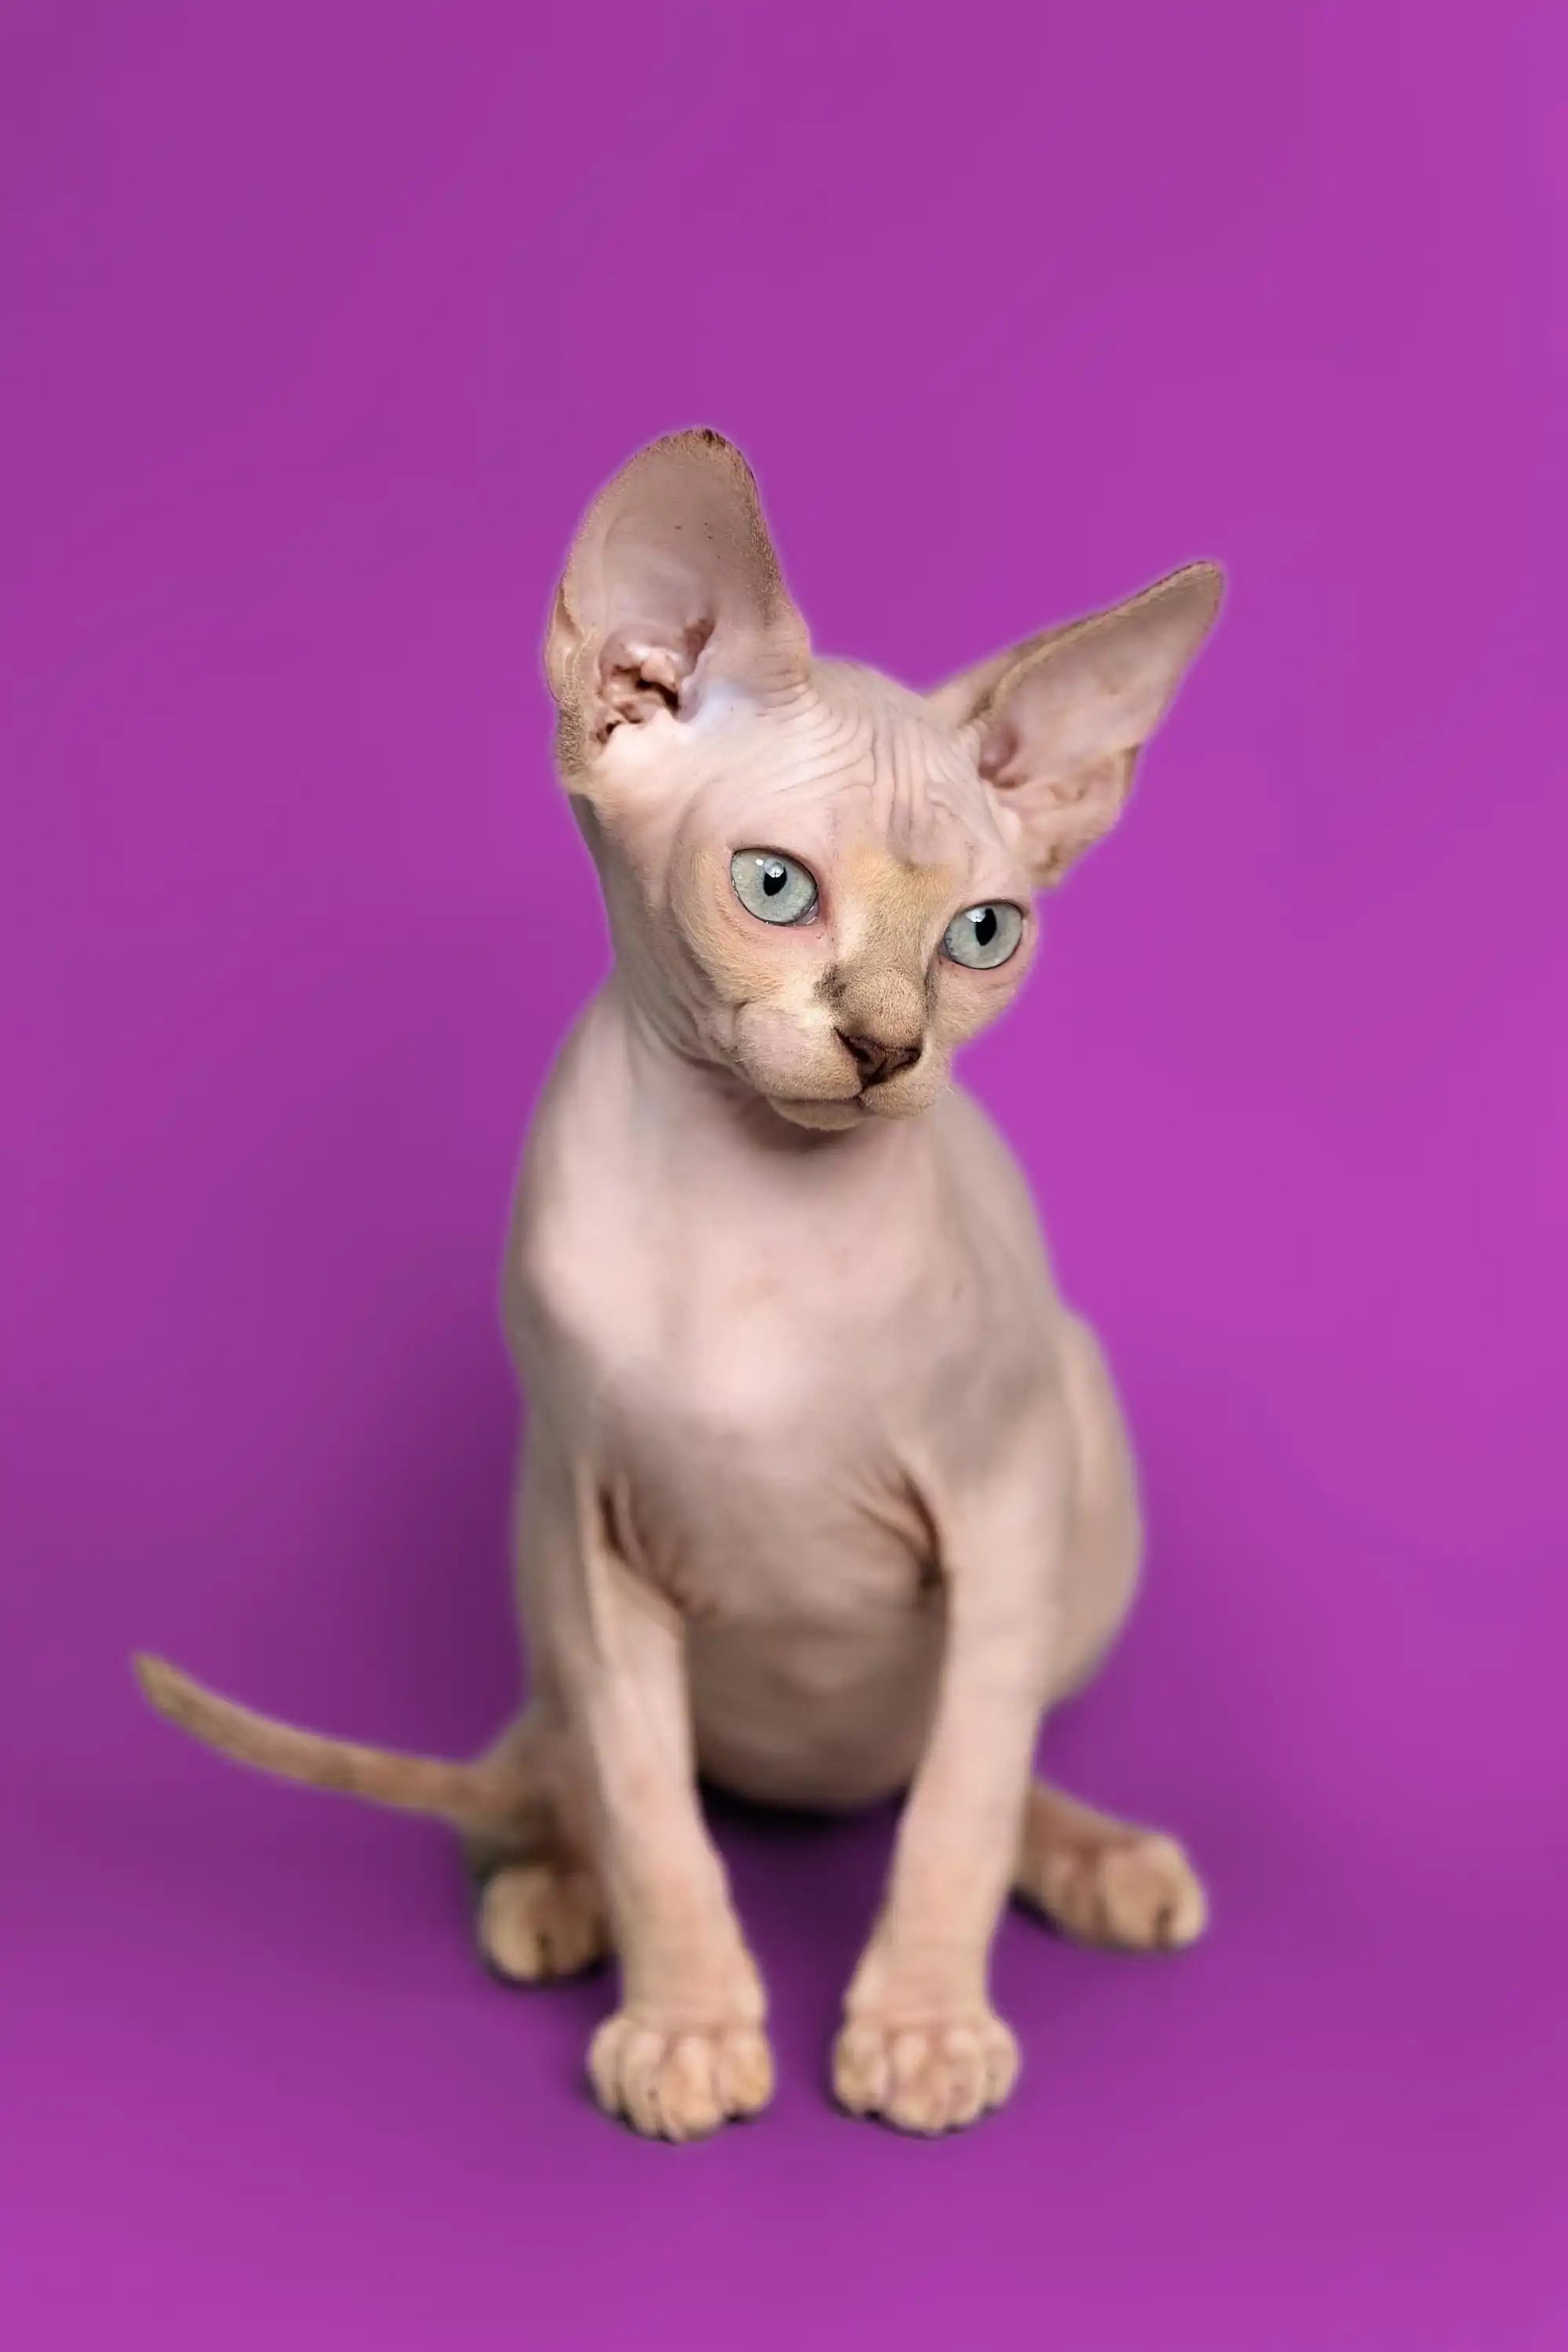 Sphynx Cats and Kittens for Sale Kendra | Kitten